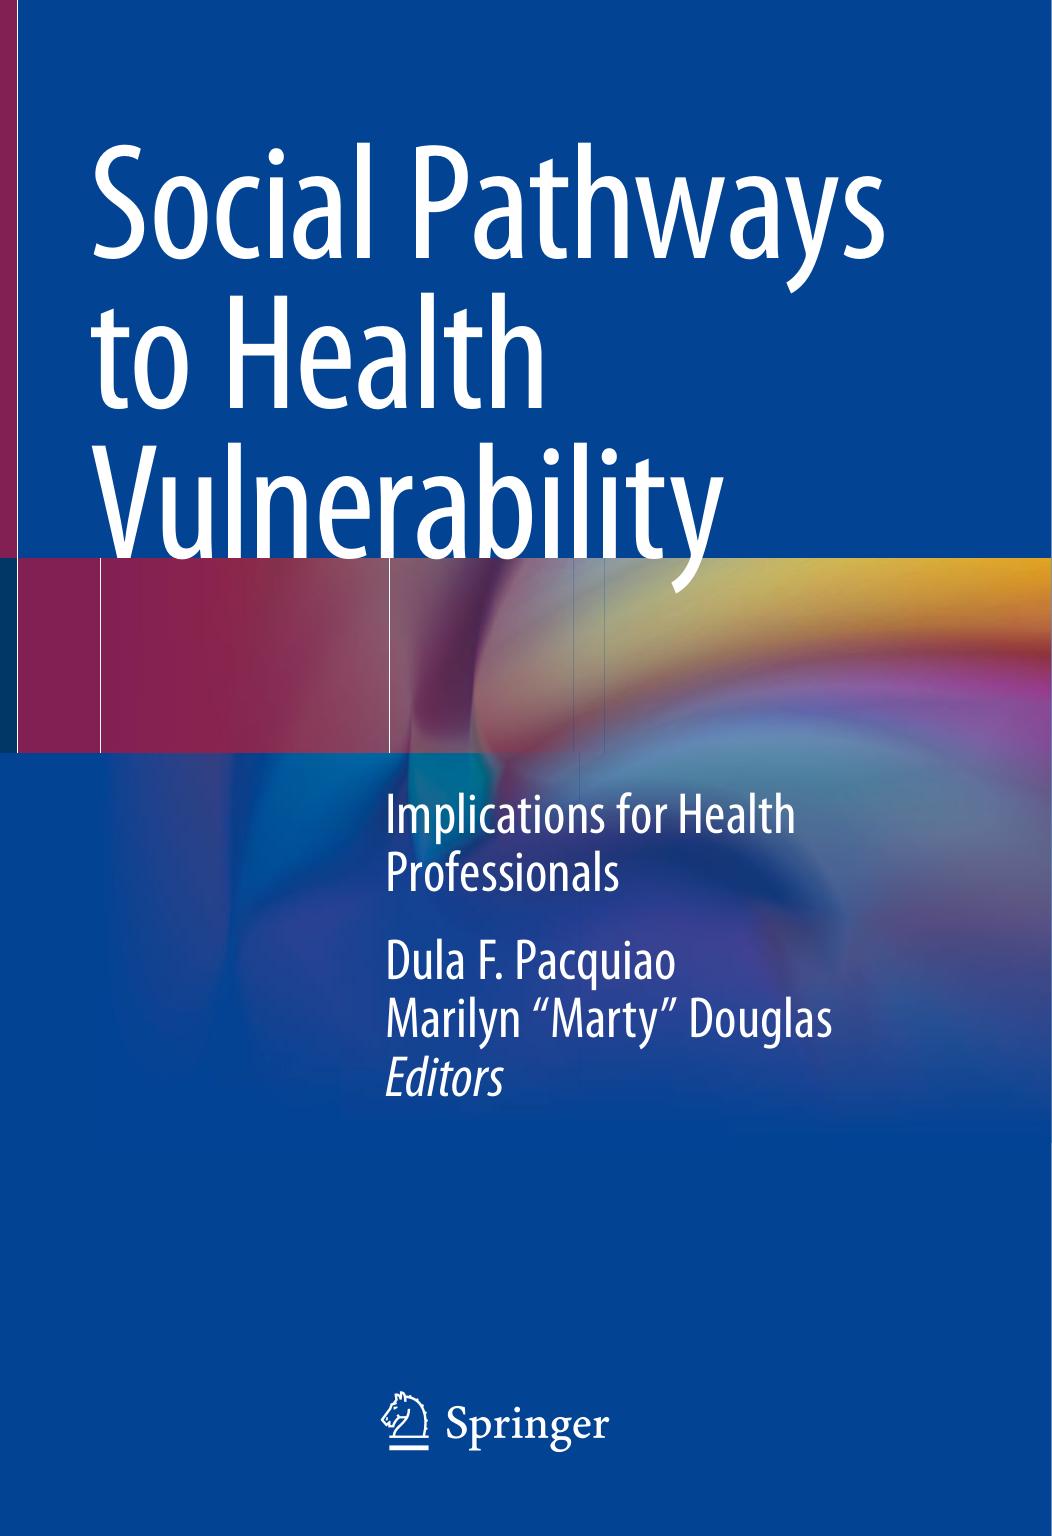 Social Pathways to Health Vulnerability Implications for Health Professionals 2019